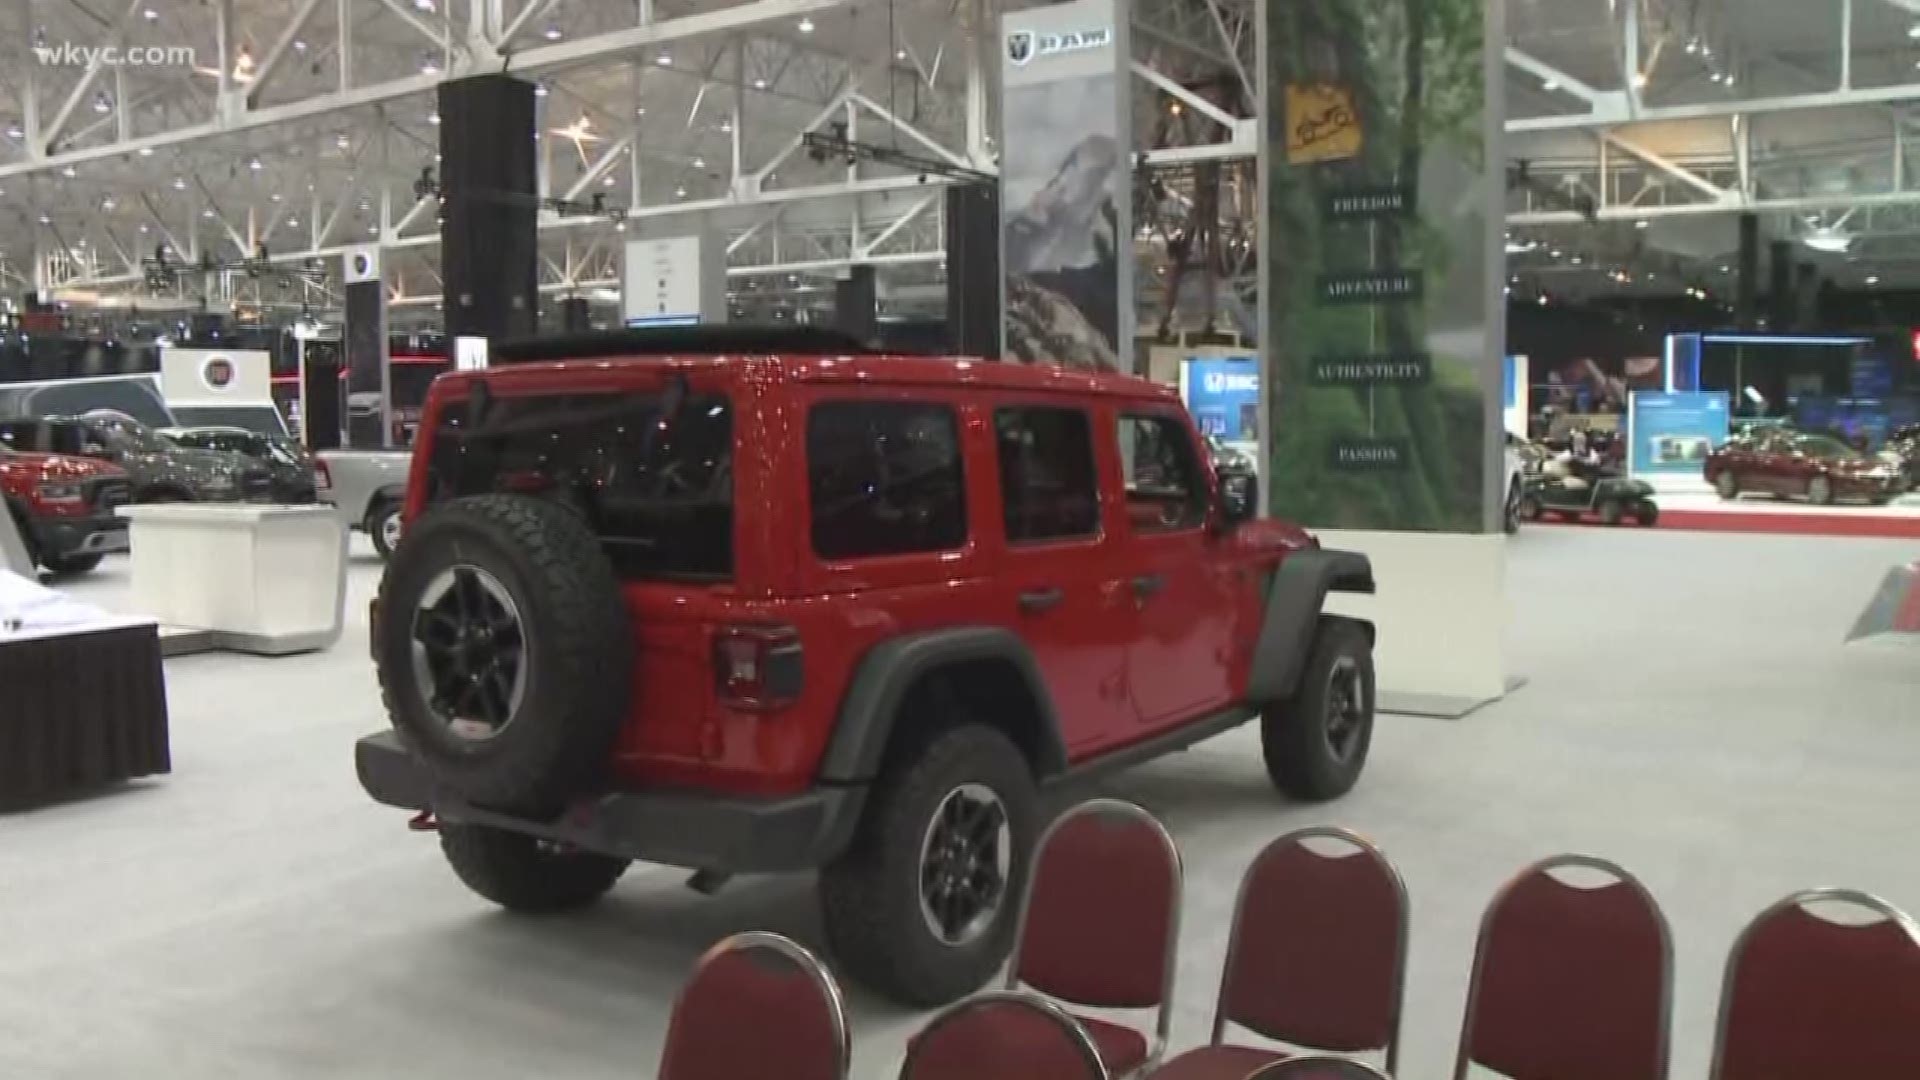 Feb. 22, 2019: The Cleveland Auto Show is back at the I-X Center, and Austin Love is there with a preview of all the things you can see.